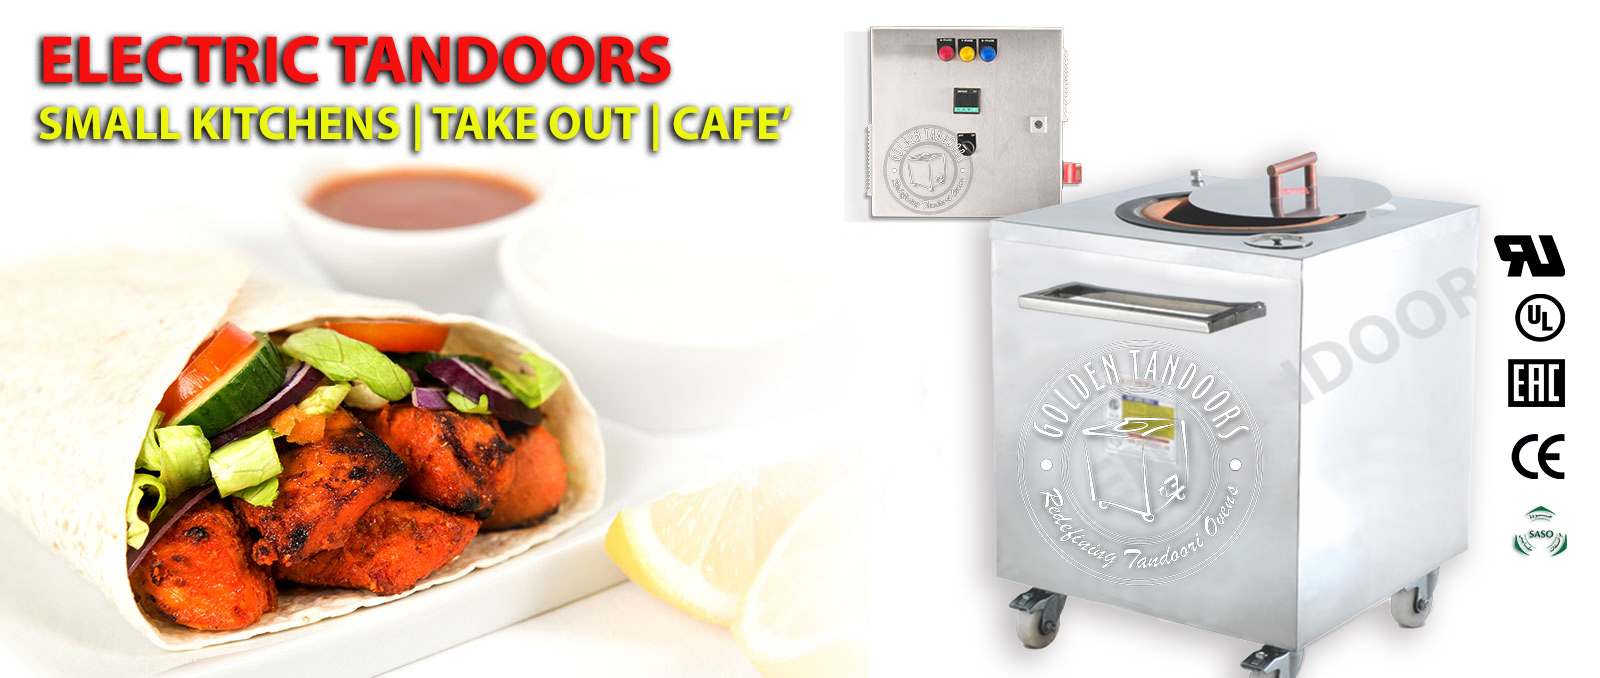 Electric Tandoor small kitchen cafe takeaway